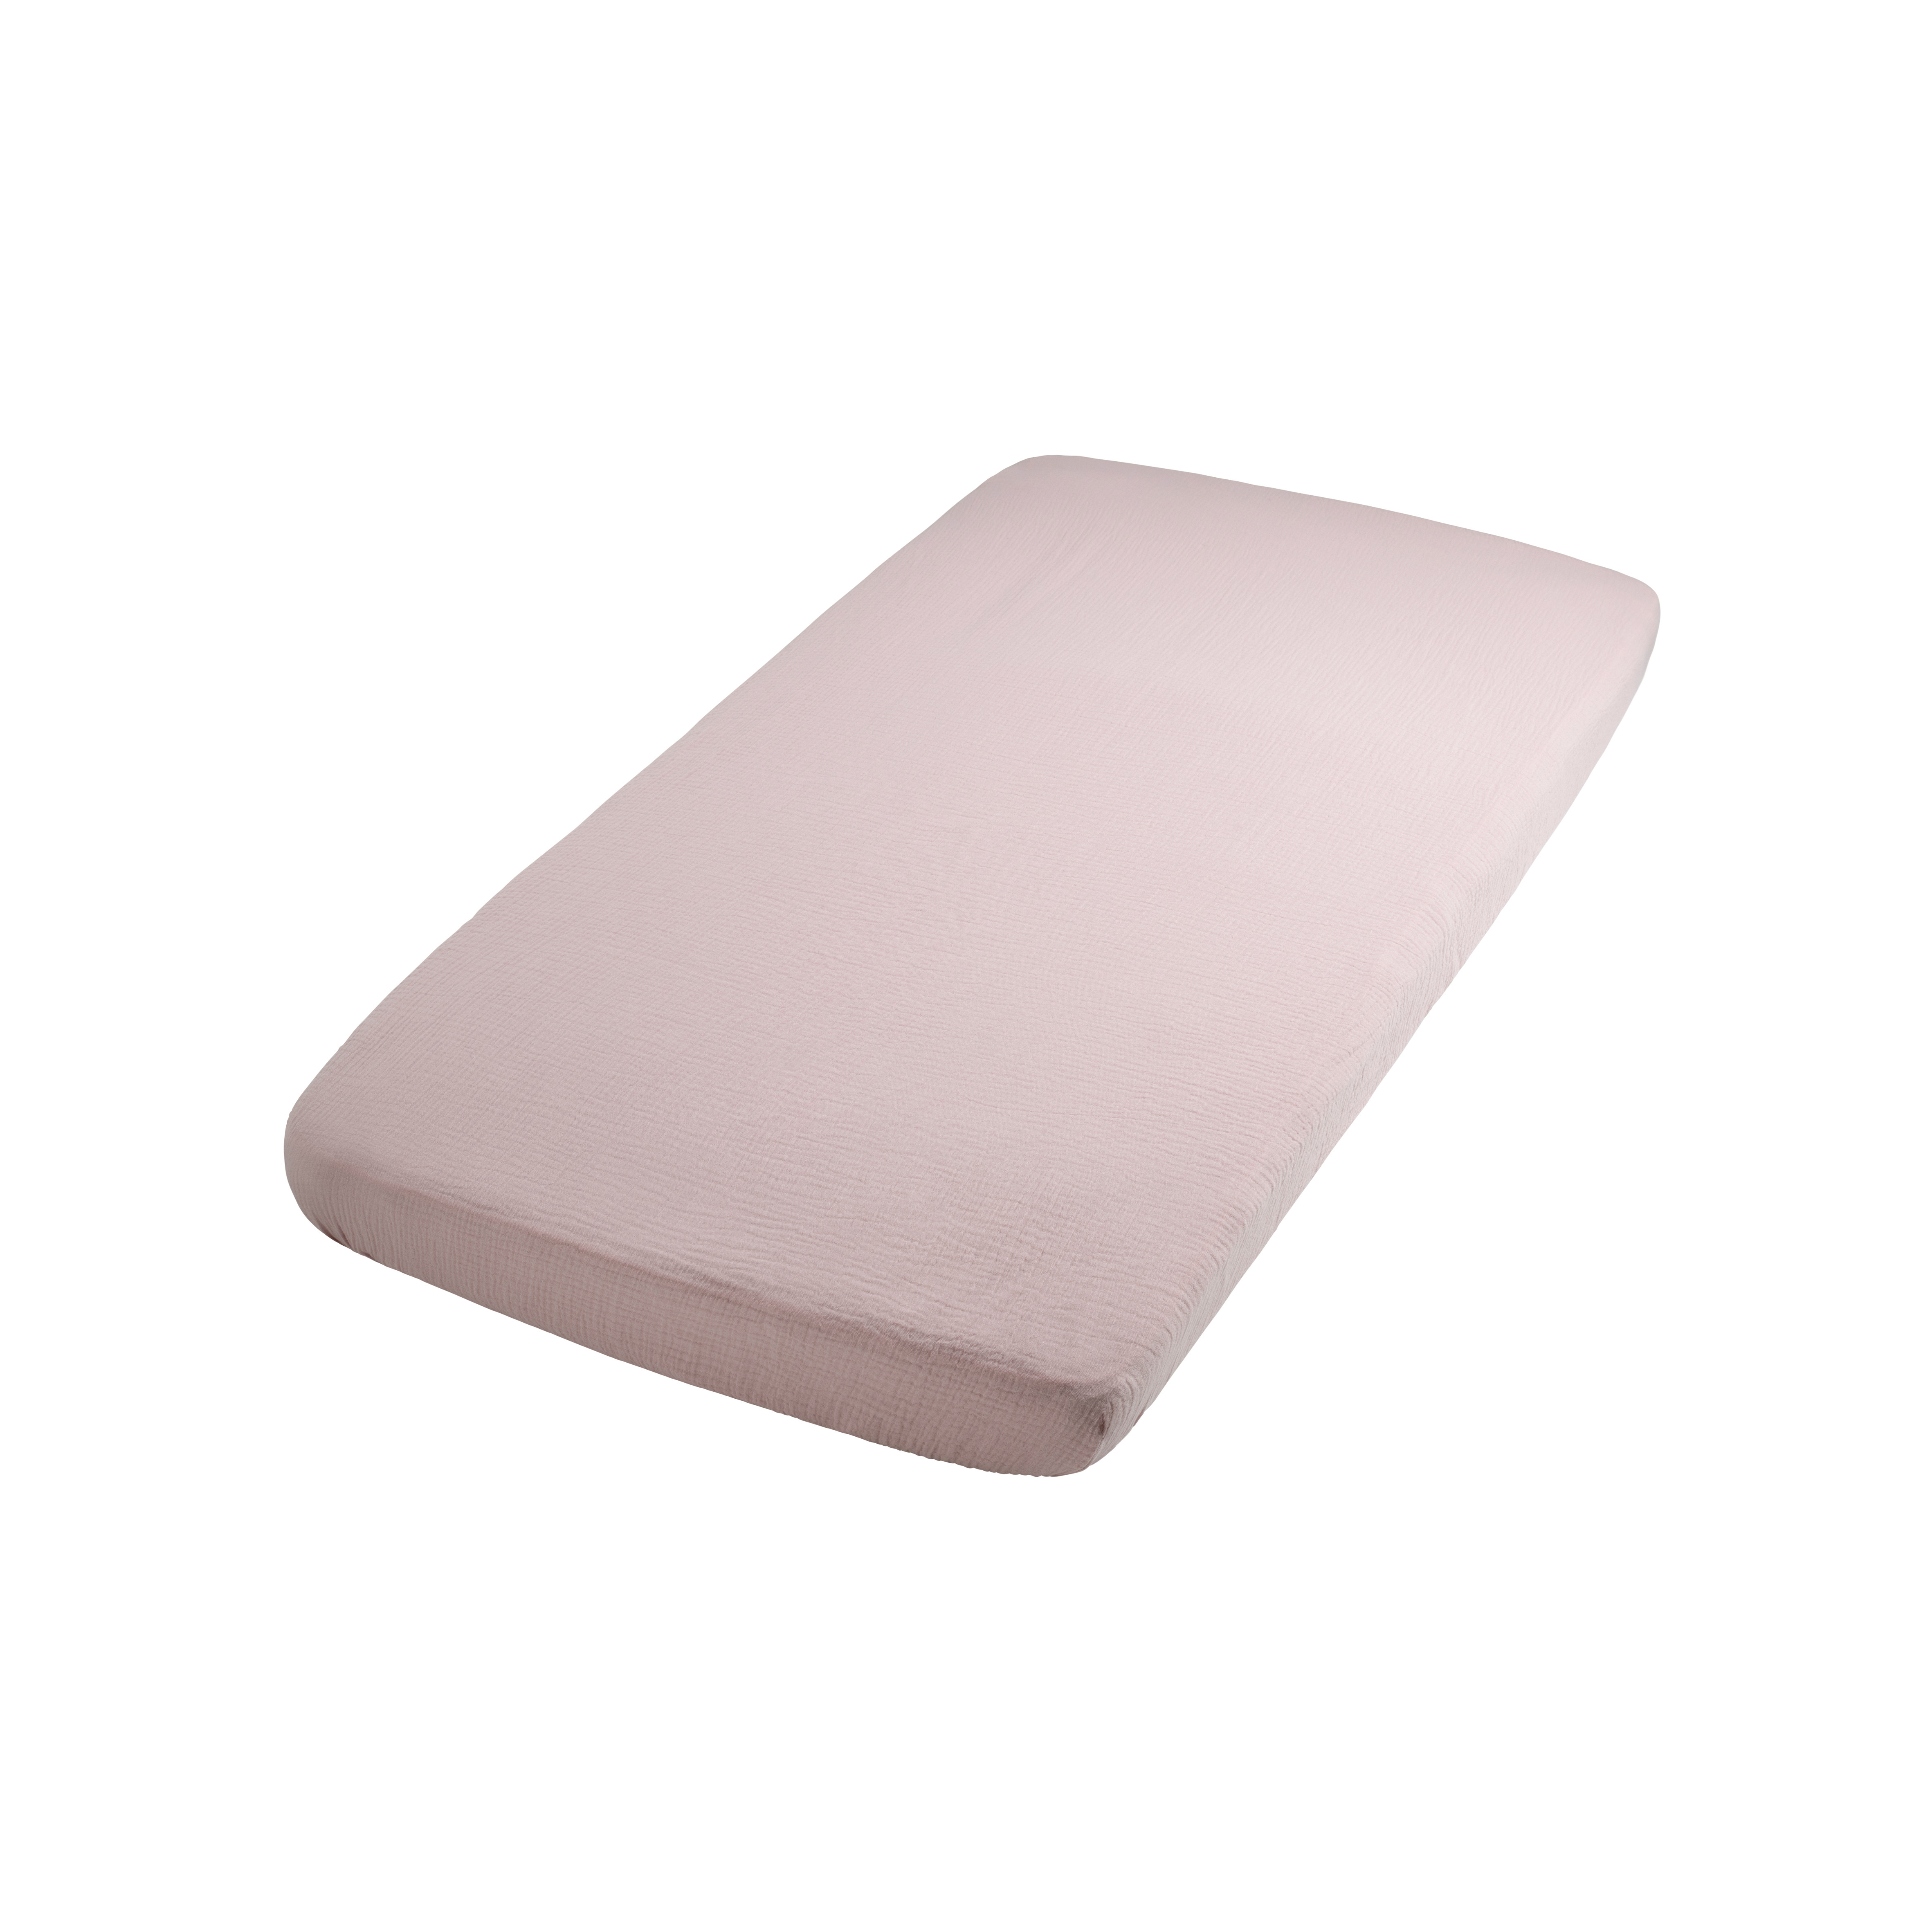 Fitted sheet Fresh ECO old pink - 40x80